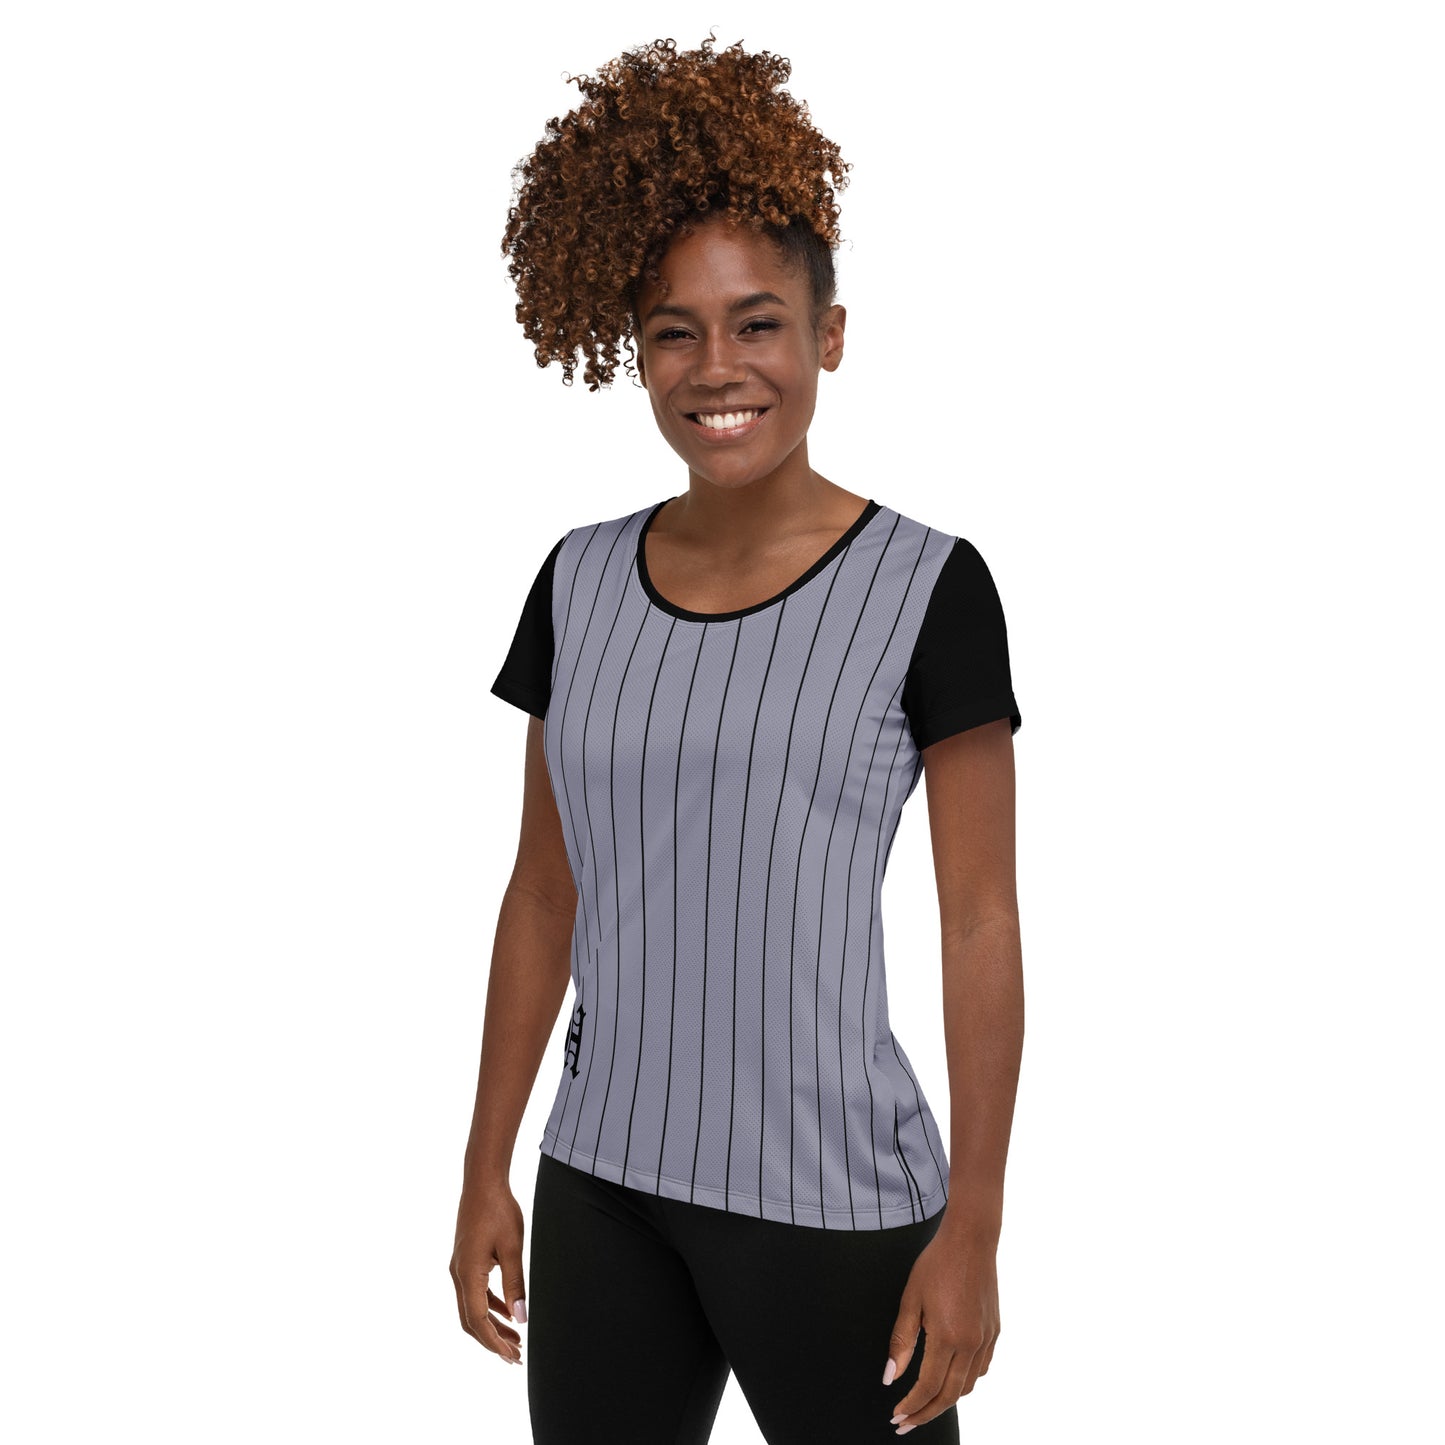 Pinstripes - Holt Whitted Signature - Women's Jersey